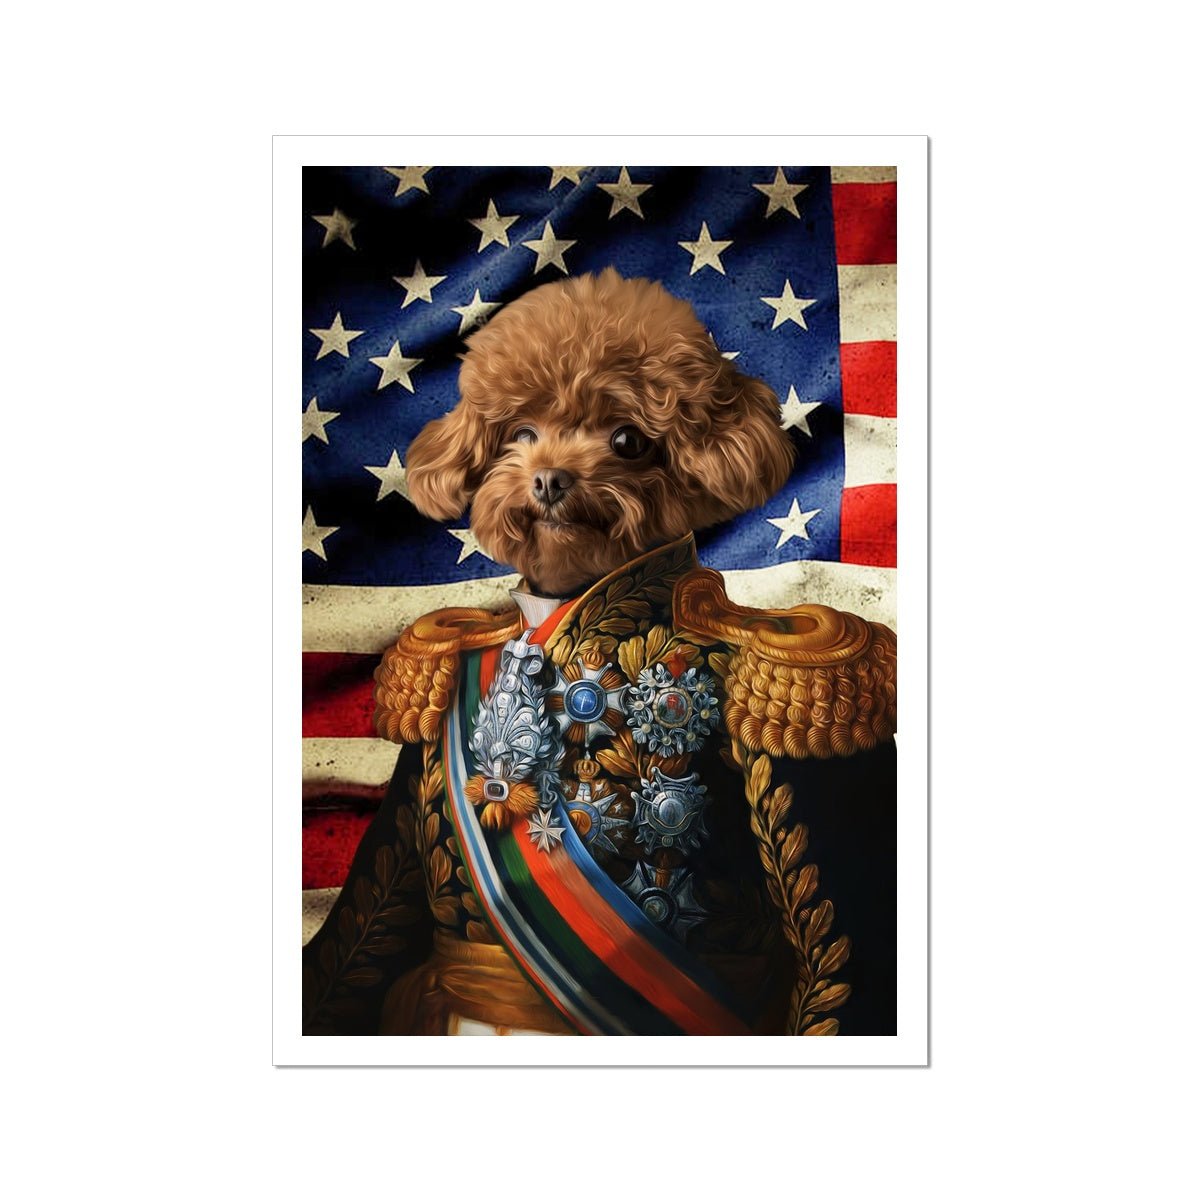 The First Lieutenant USA Flag Edition: Custom Pet Poster - Paw & Glory - #pet portraits# - #dog portraits# - #pet portraits uk#Paw & Glory, paw and glory, dog picture royalty funny pet drawings pet into art cat painting general crown and paw photo dogs uniform pet portraits